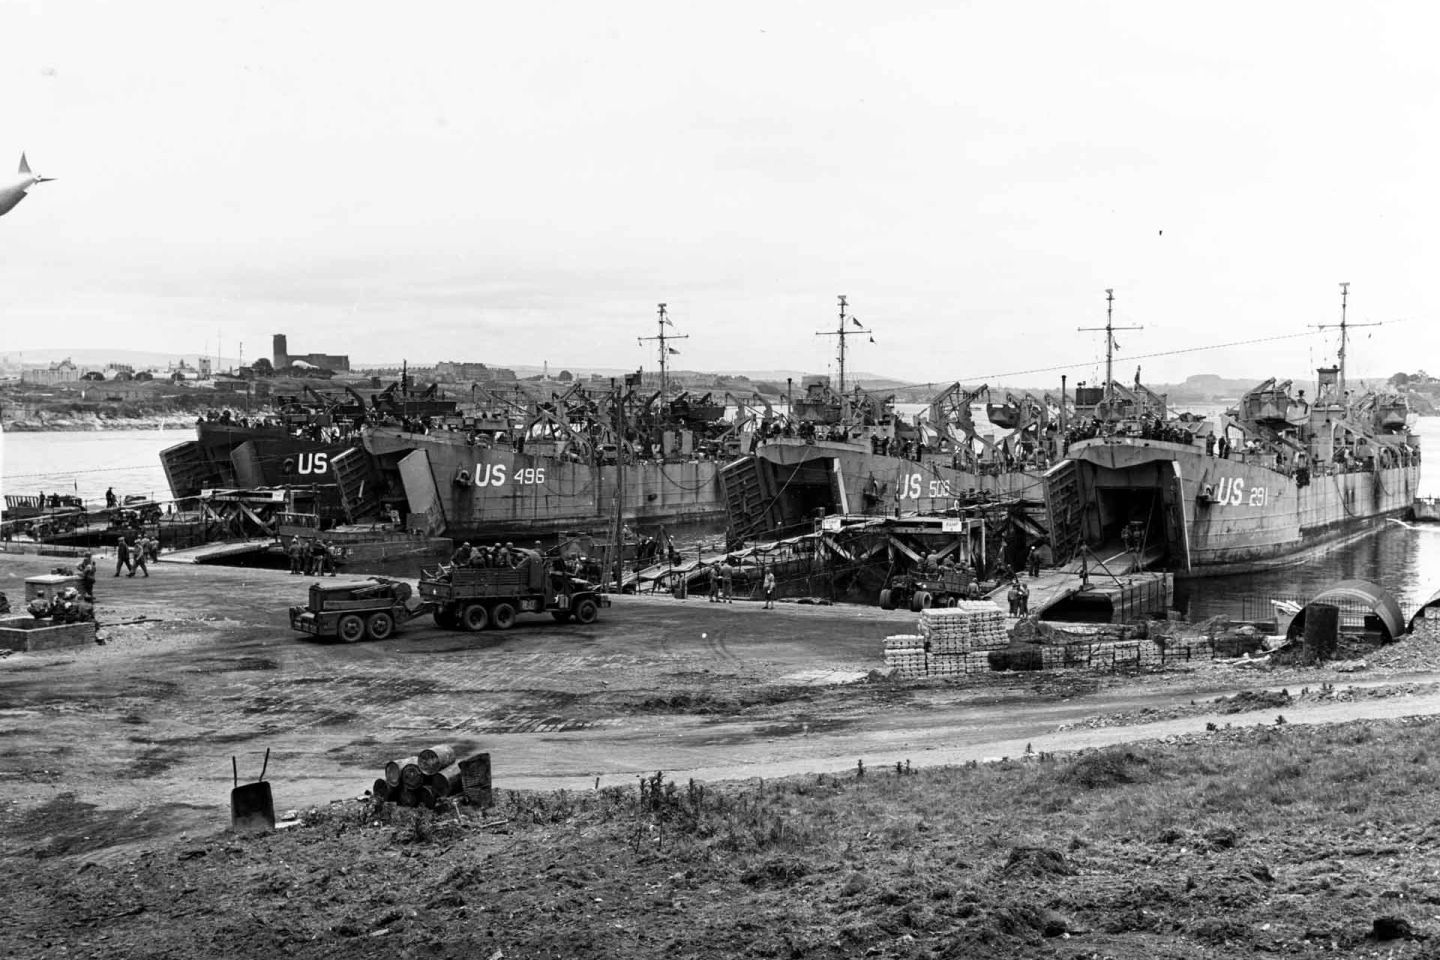 Four LST's take vehicles aboard during pre-invasion loading operations at an English port. USS LST-496 is second from the left.